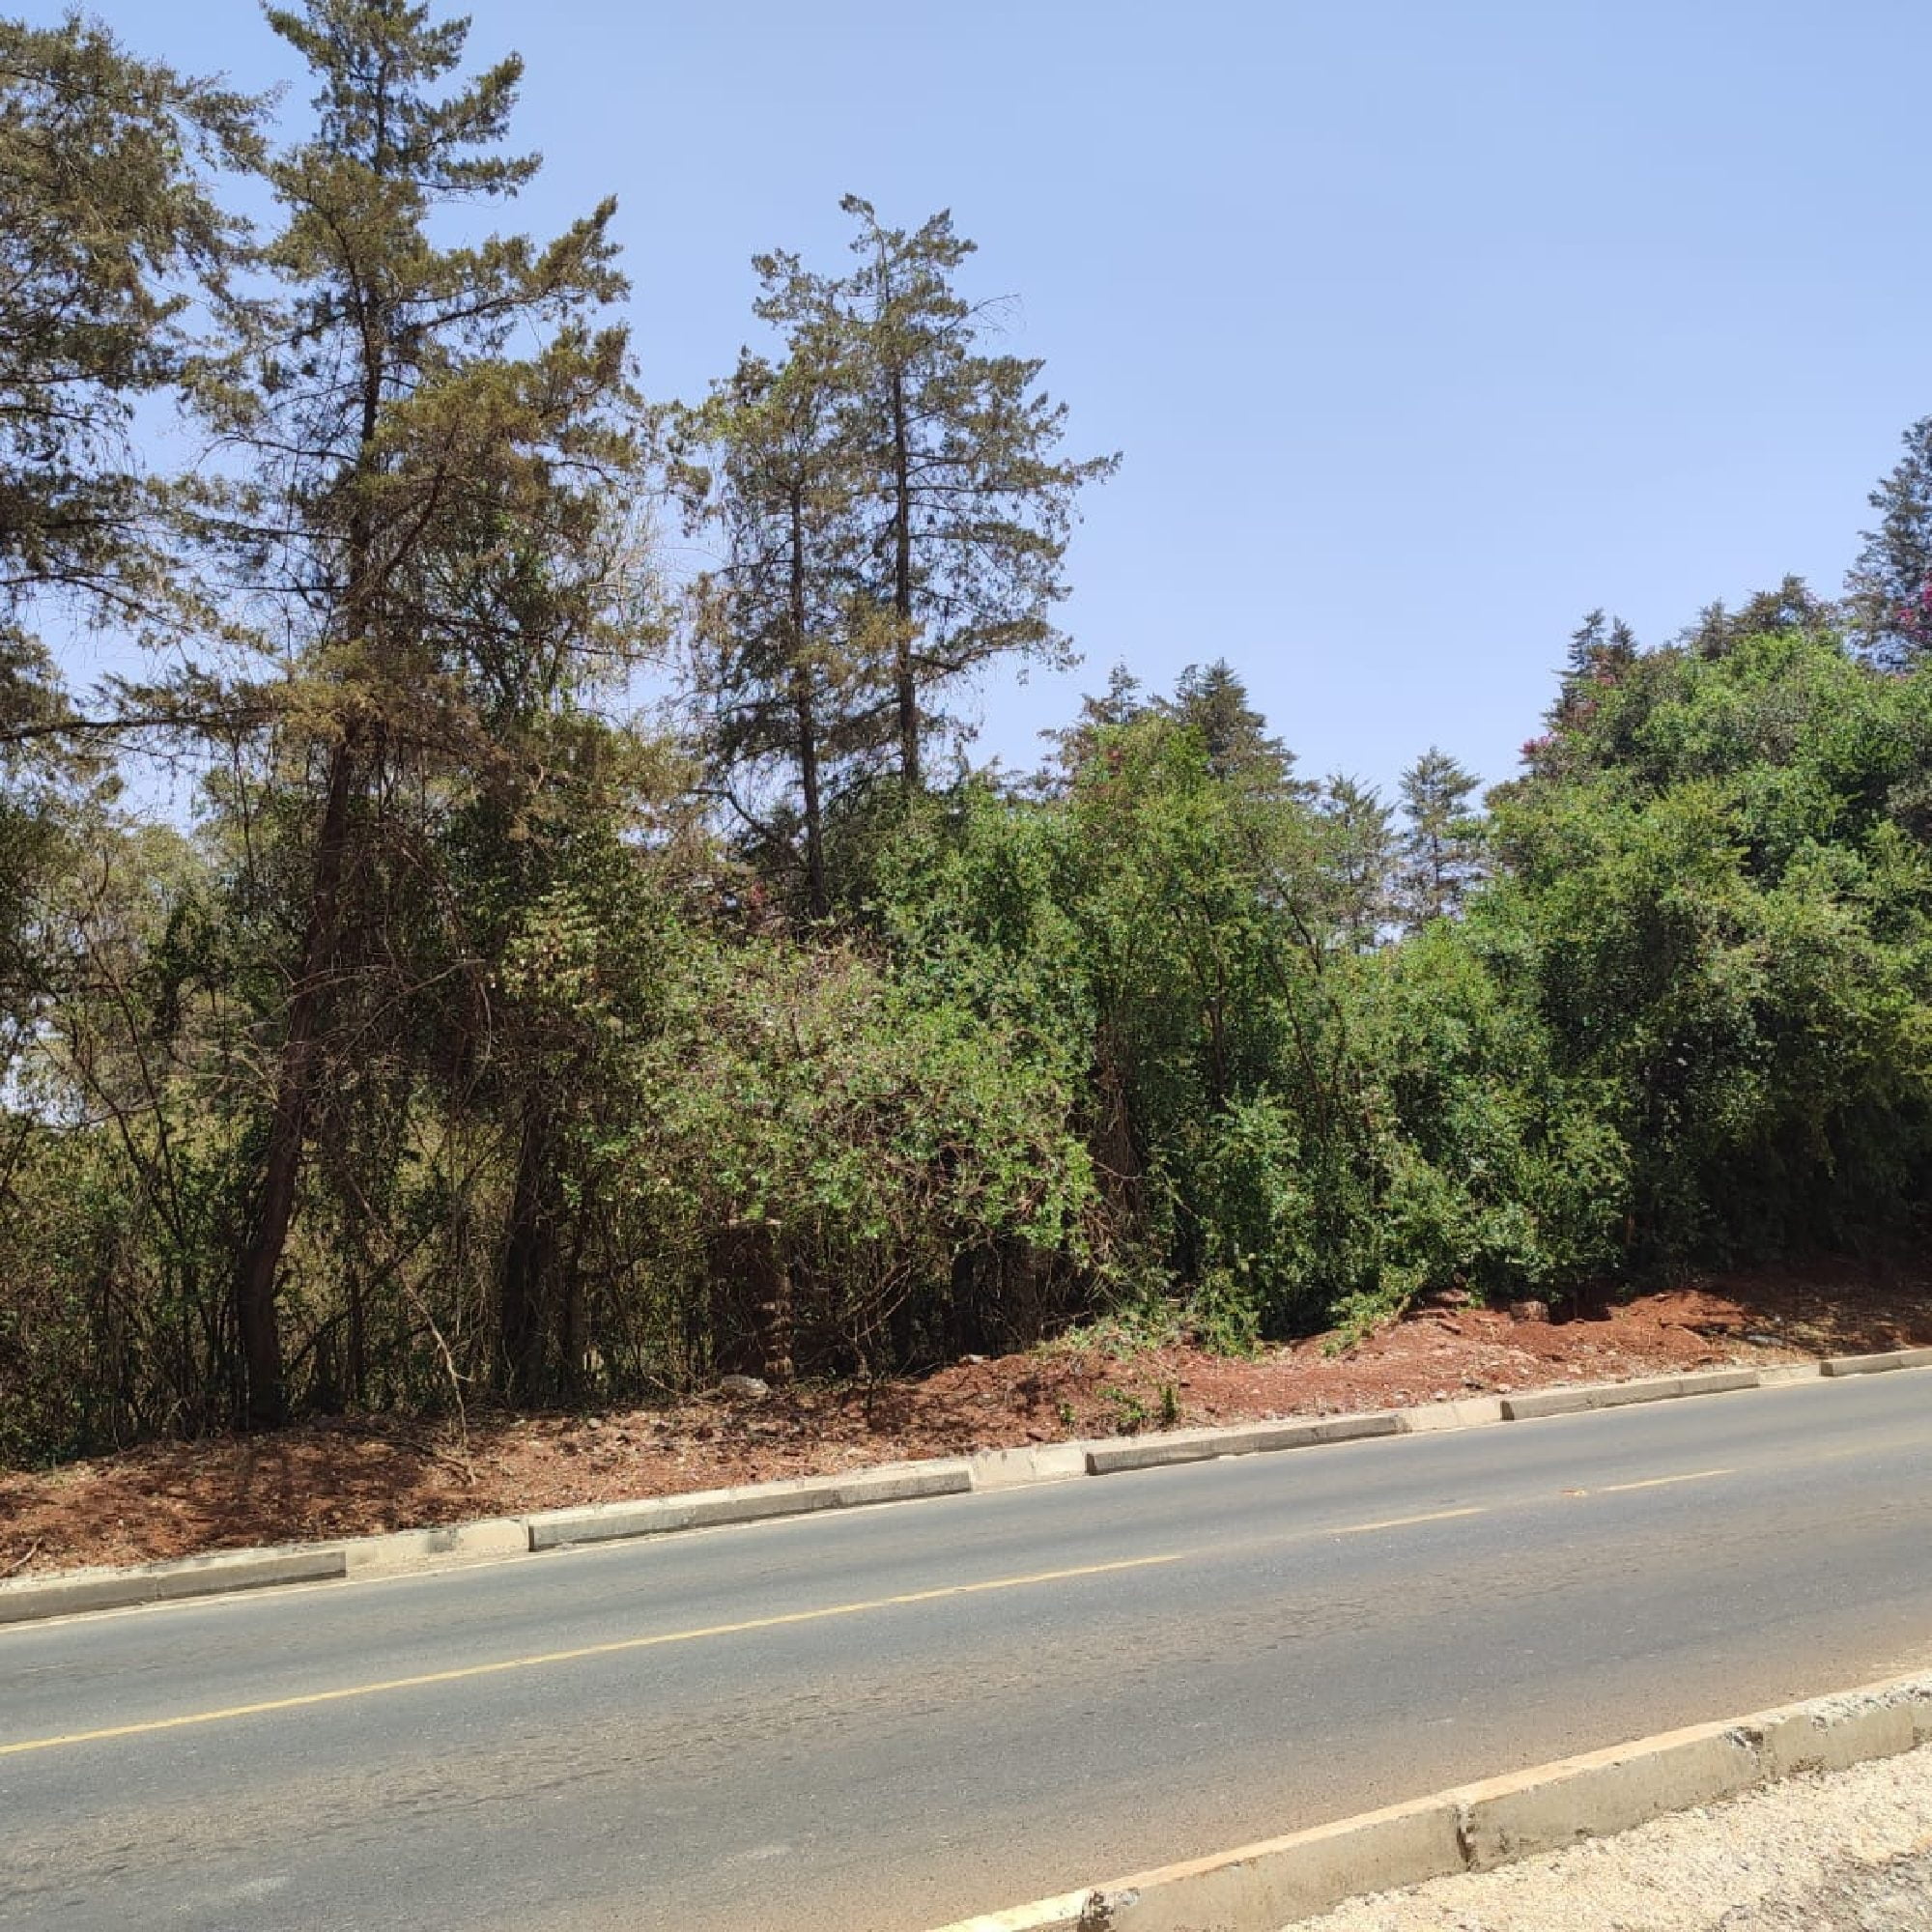 Karen land for sale 1 Acre Hardy Masai West Road Ready Tittle Deed Exclusive!